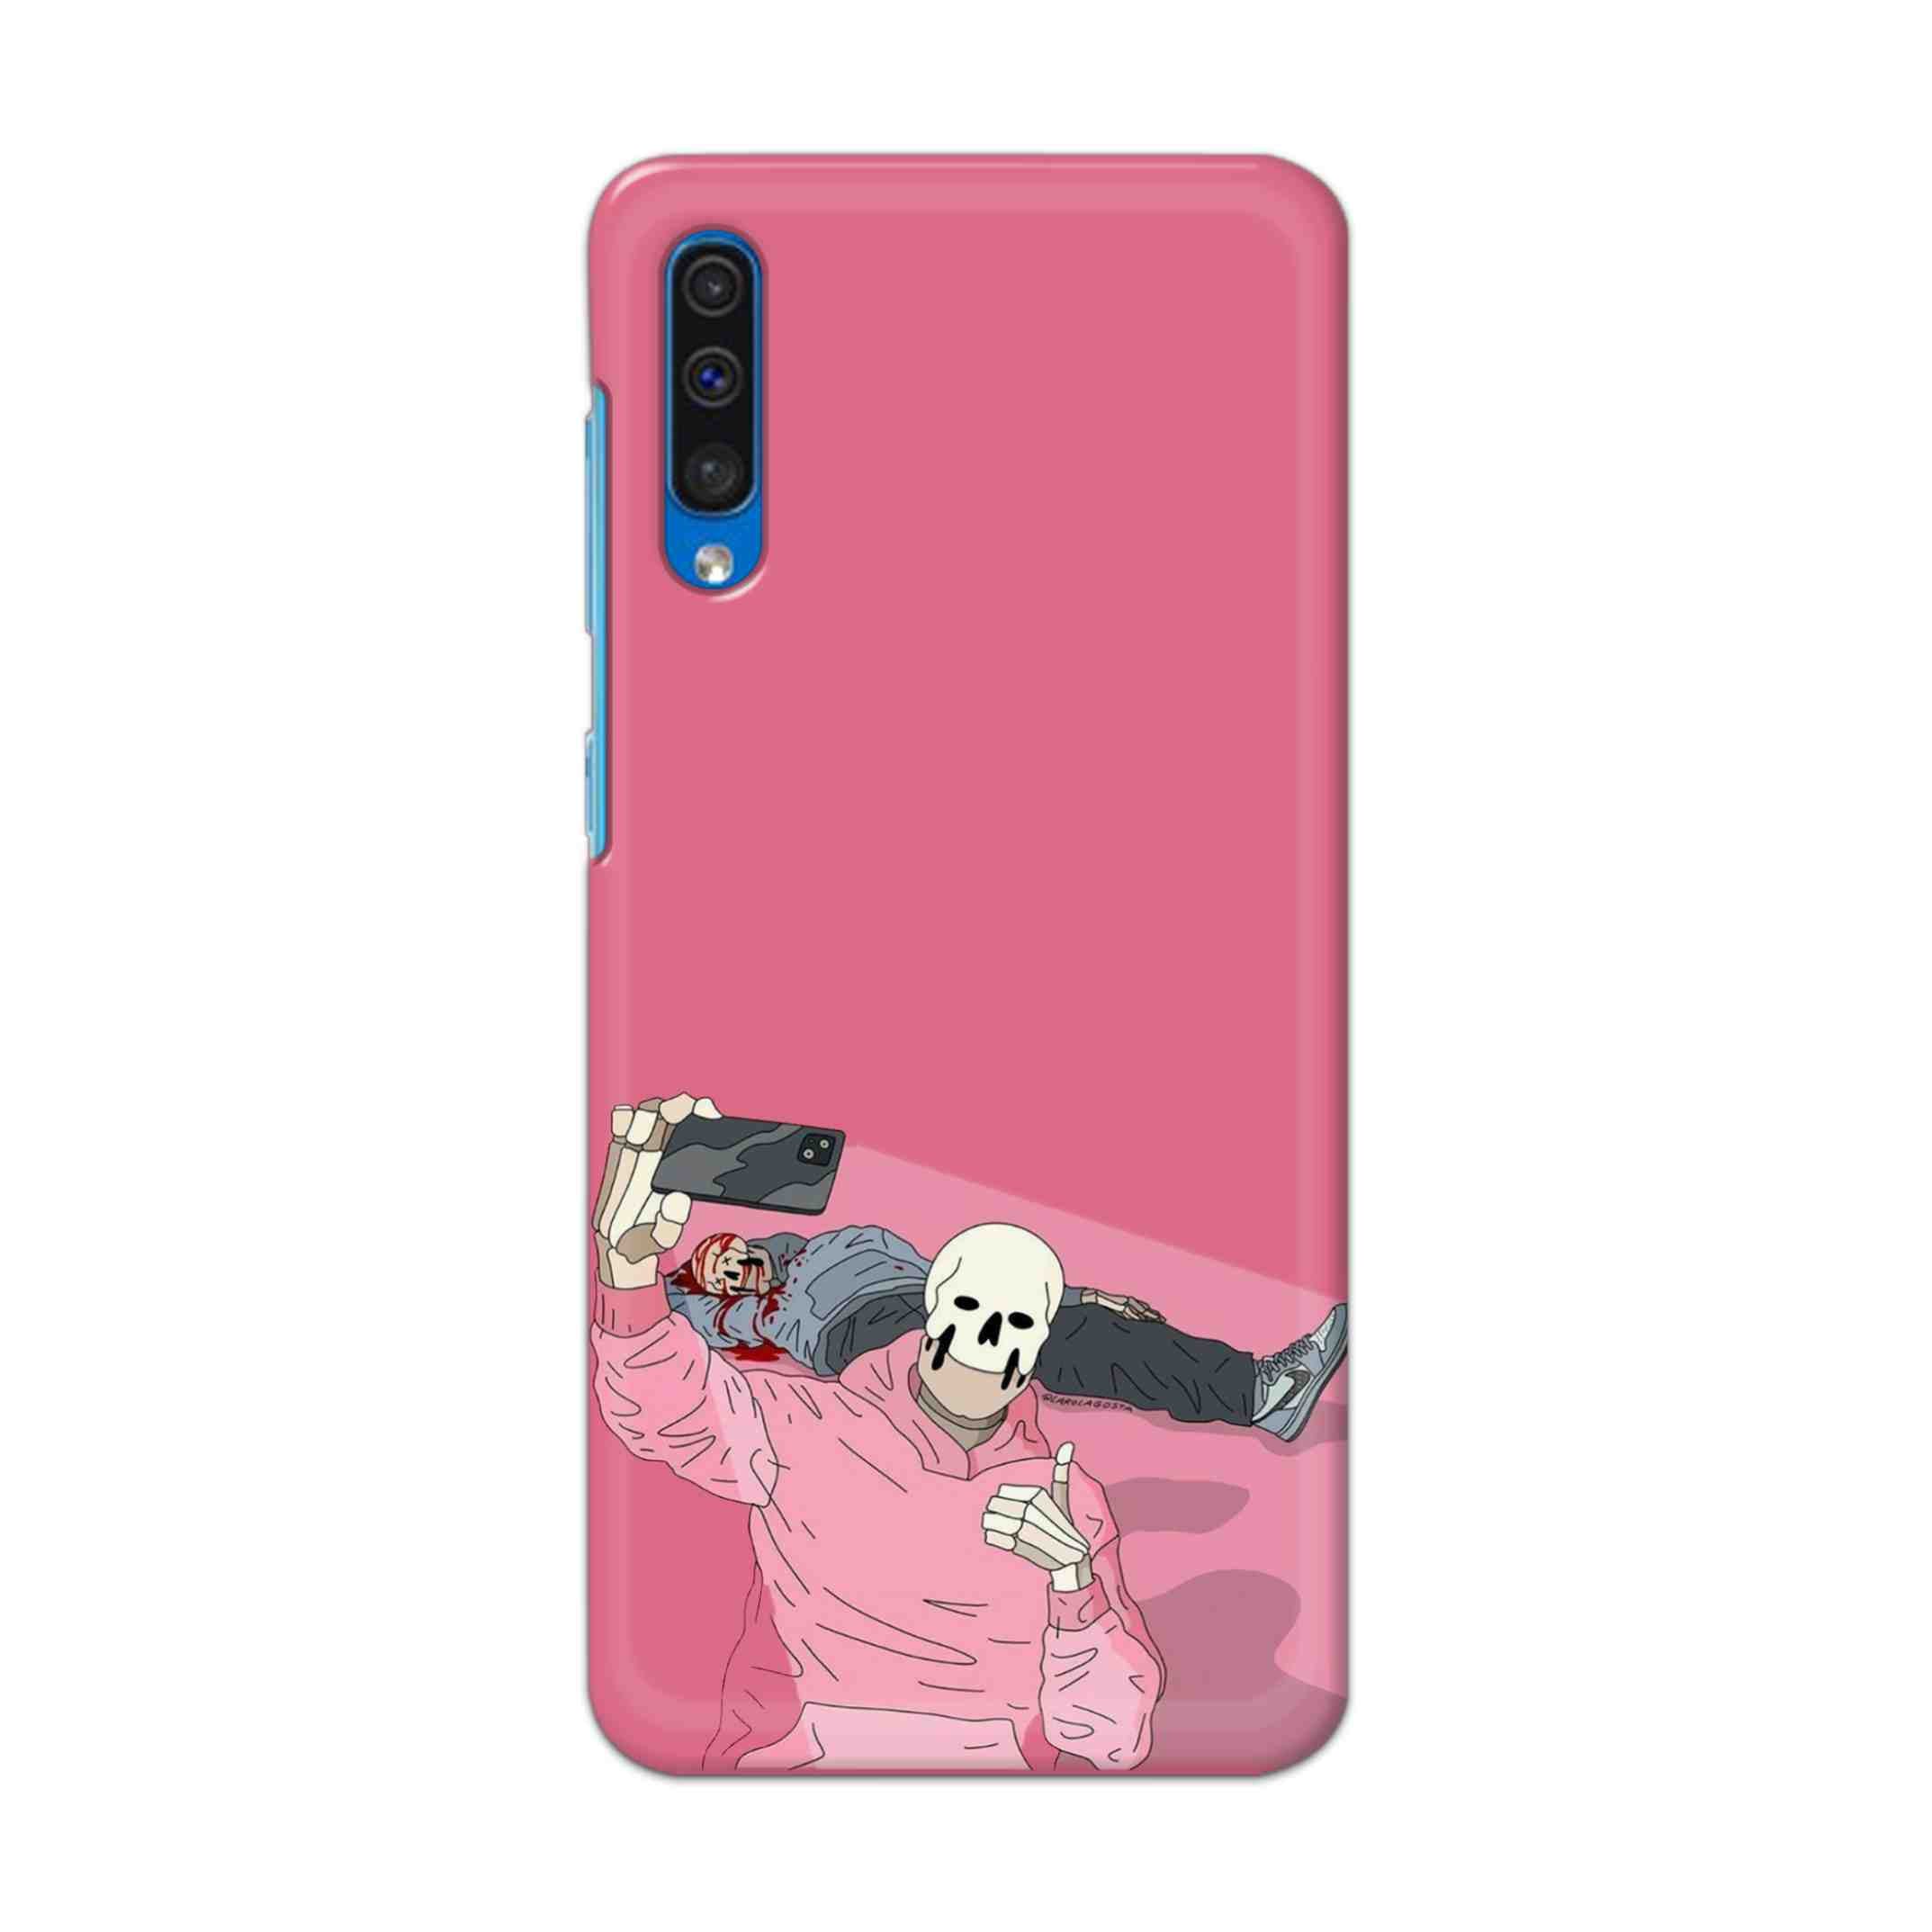 Buy Selfie Hard Back Mobile Phone Case Cover For Samsung Galaxy A50 / A50s / A30s Online